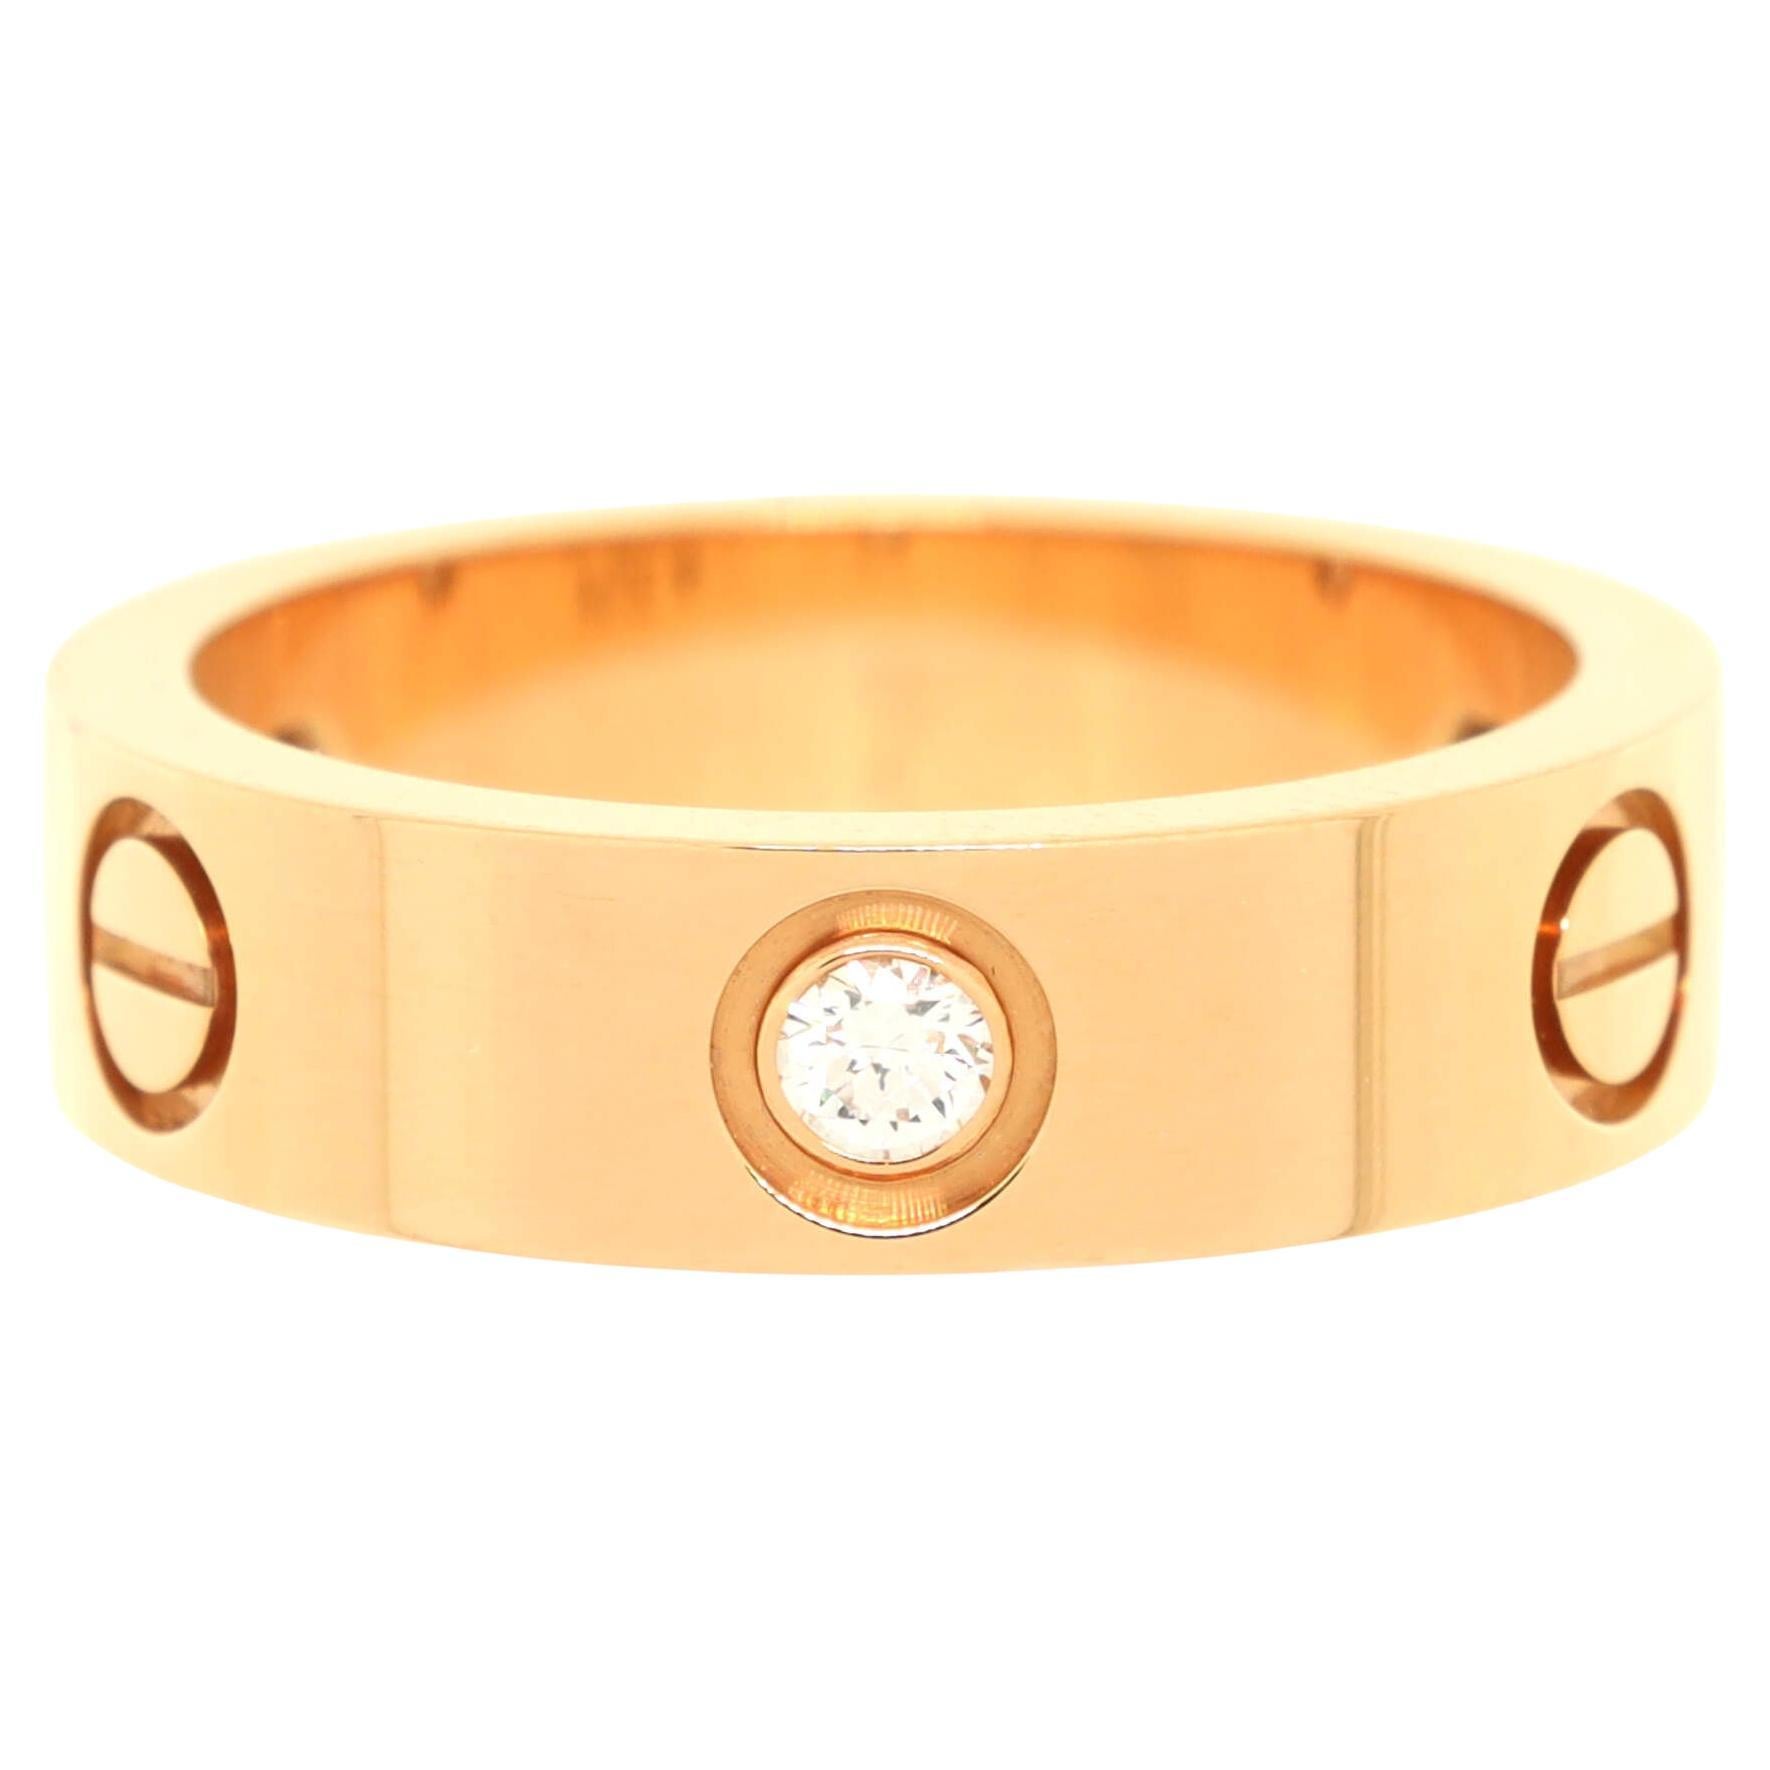 Cartier Love 3 Diamonds Band Ring 18K Rose Gold with Diamonds